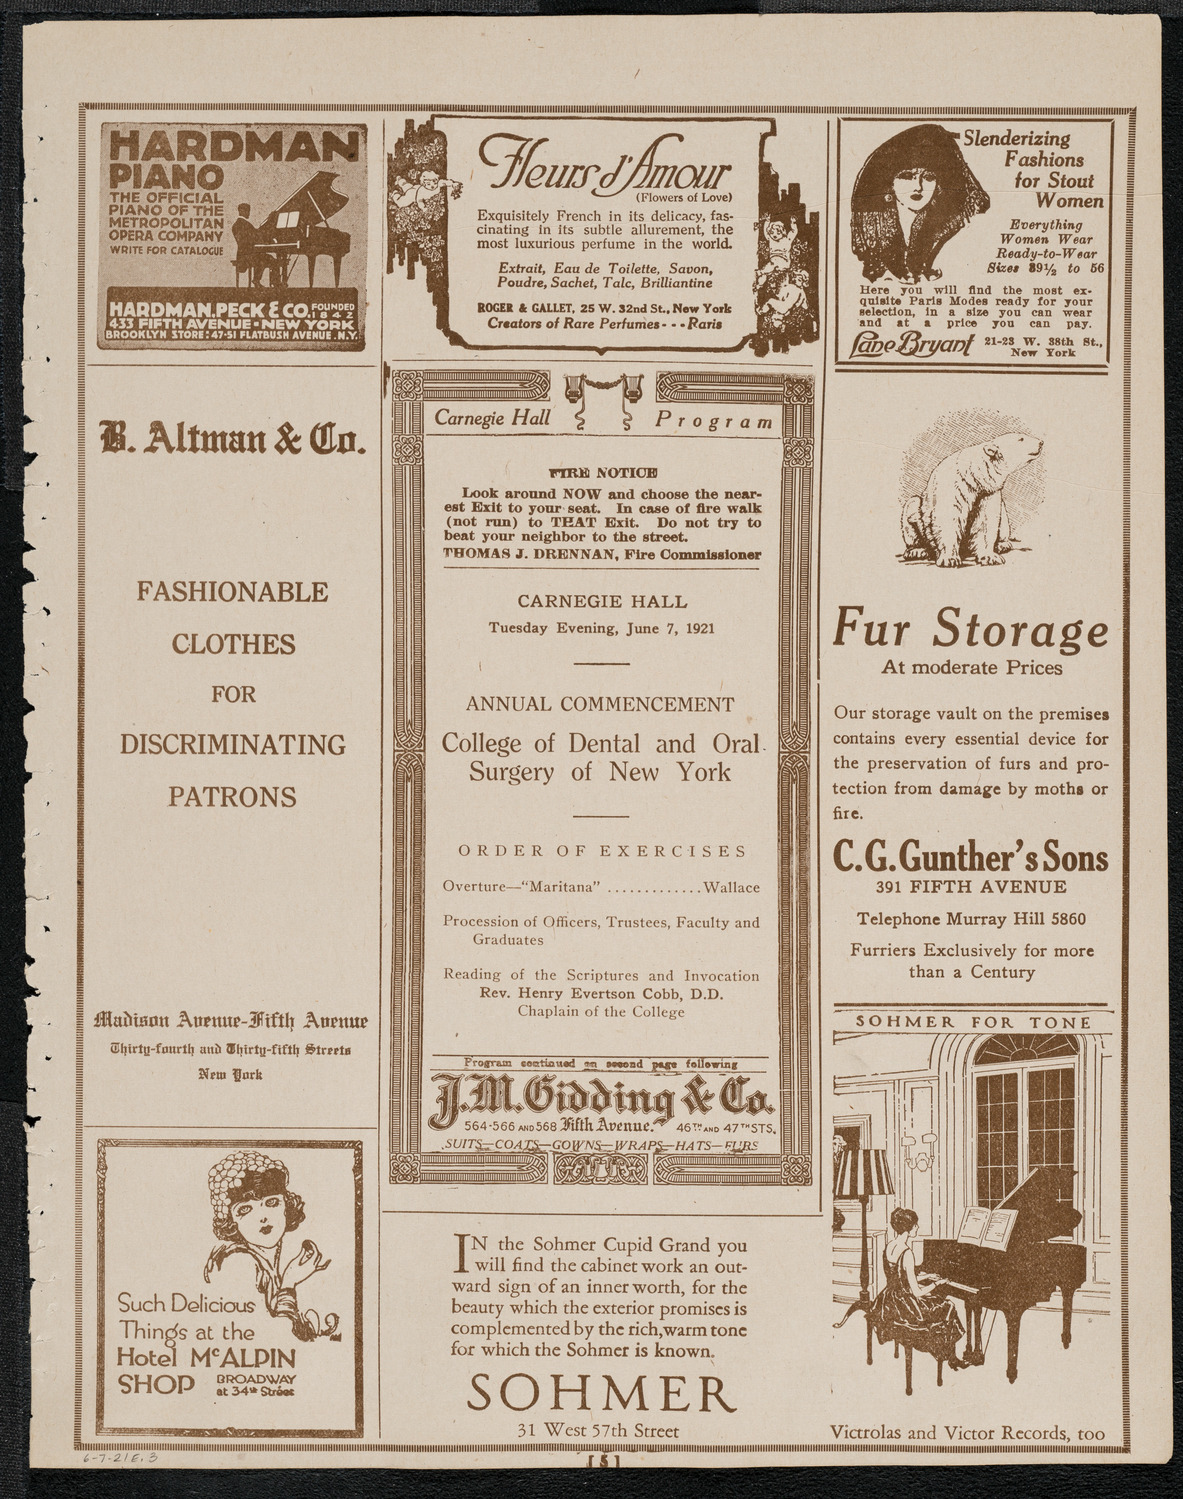 Graduation: College of Dental and Oral Surgery of New York, June 7, 1921, program page 5